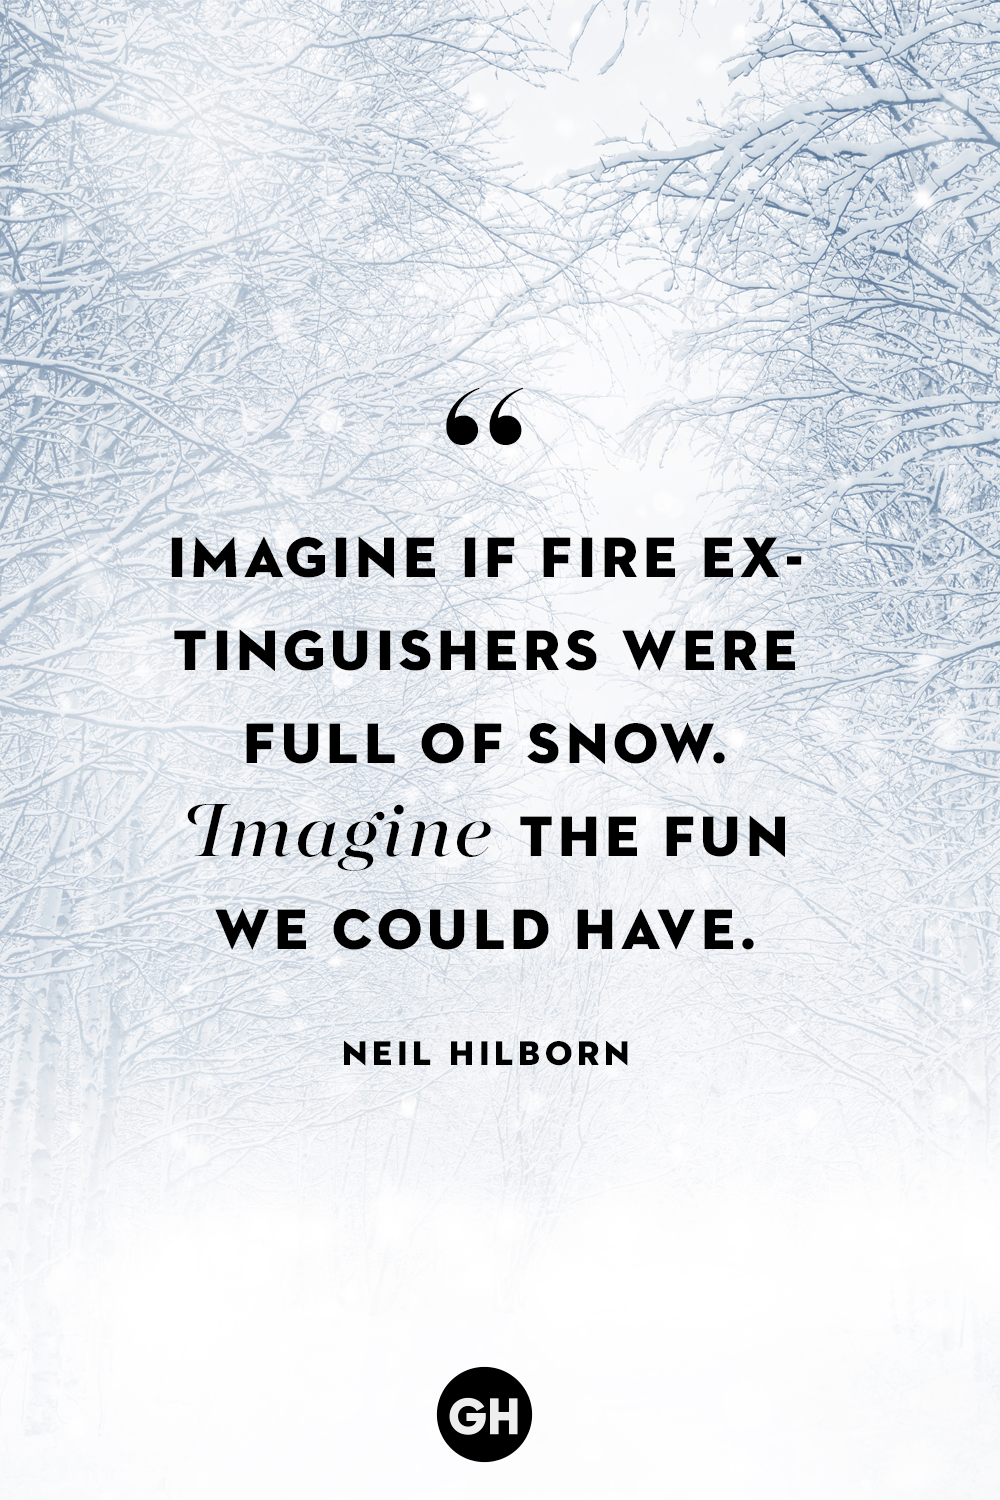 38 Best Winter Quotes - Short and Cute Quotes to Welcome Winter